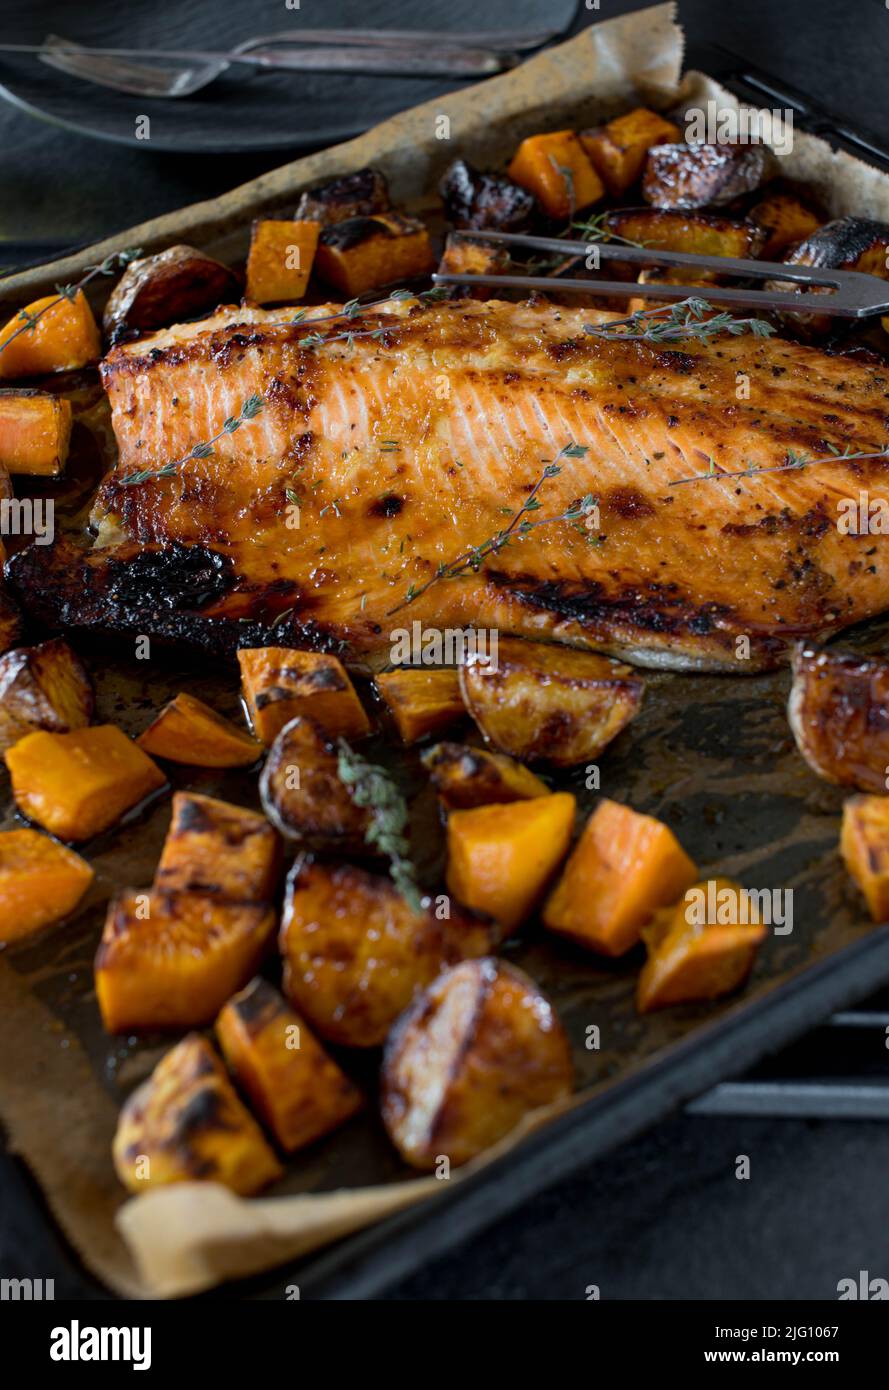 Roasted whole salmon fillet with potatoes Stock Photo